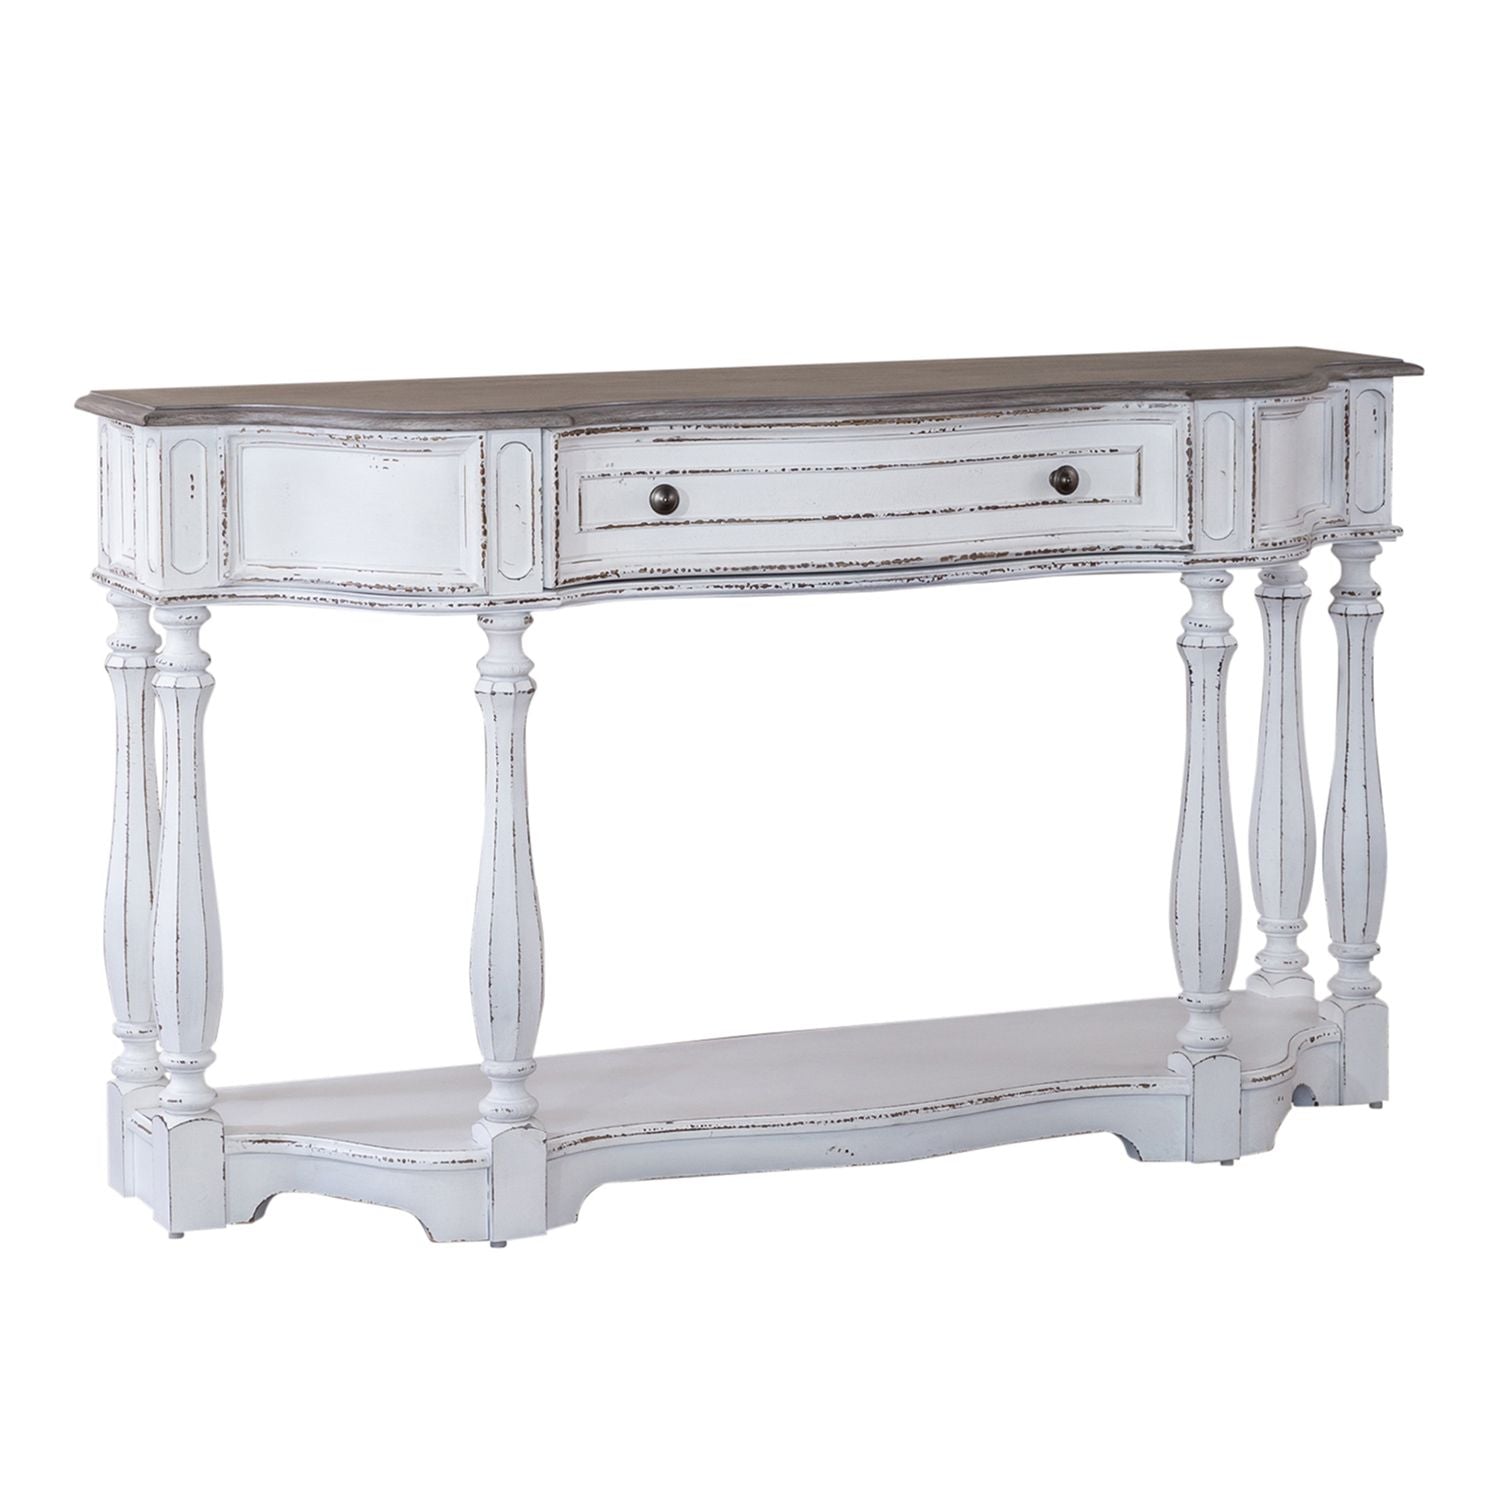 Magnolia Manor 56 Inch Hall Console Table by Liberty